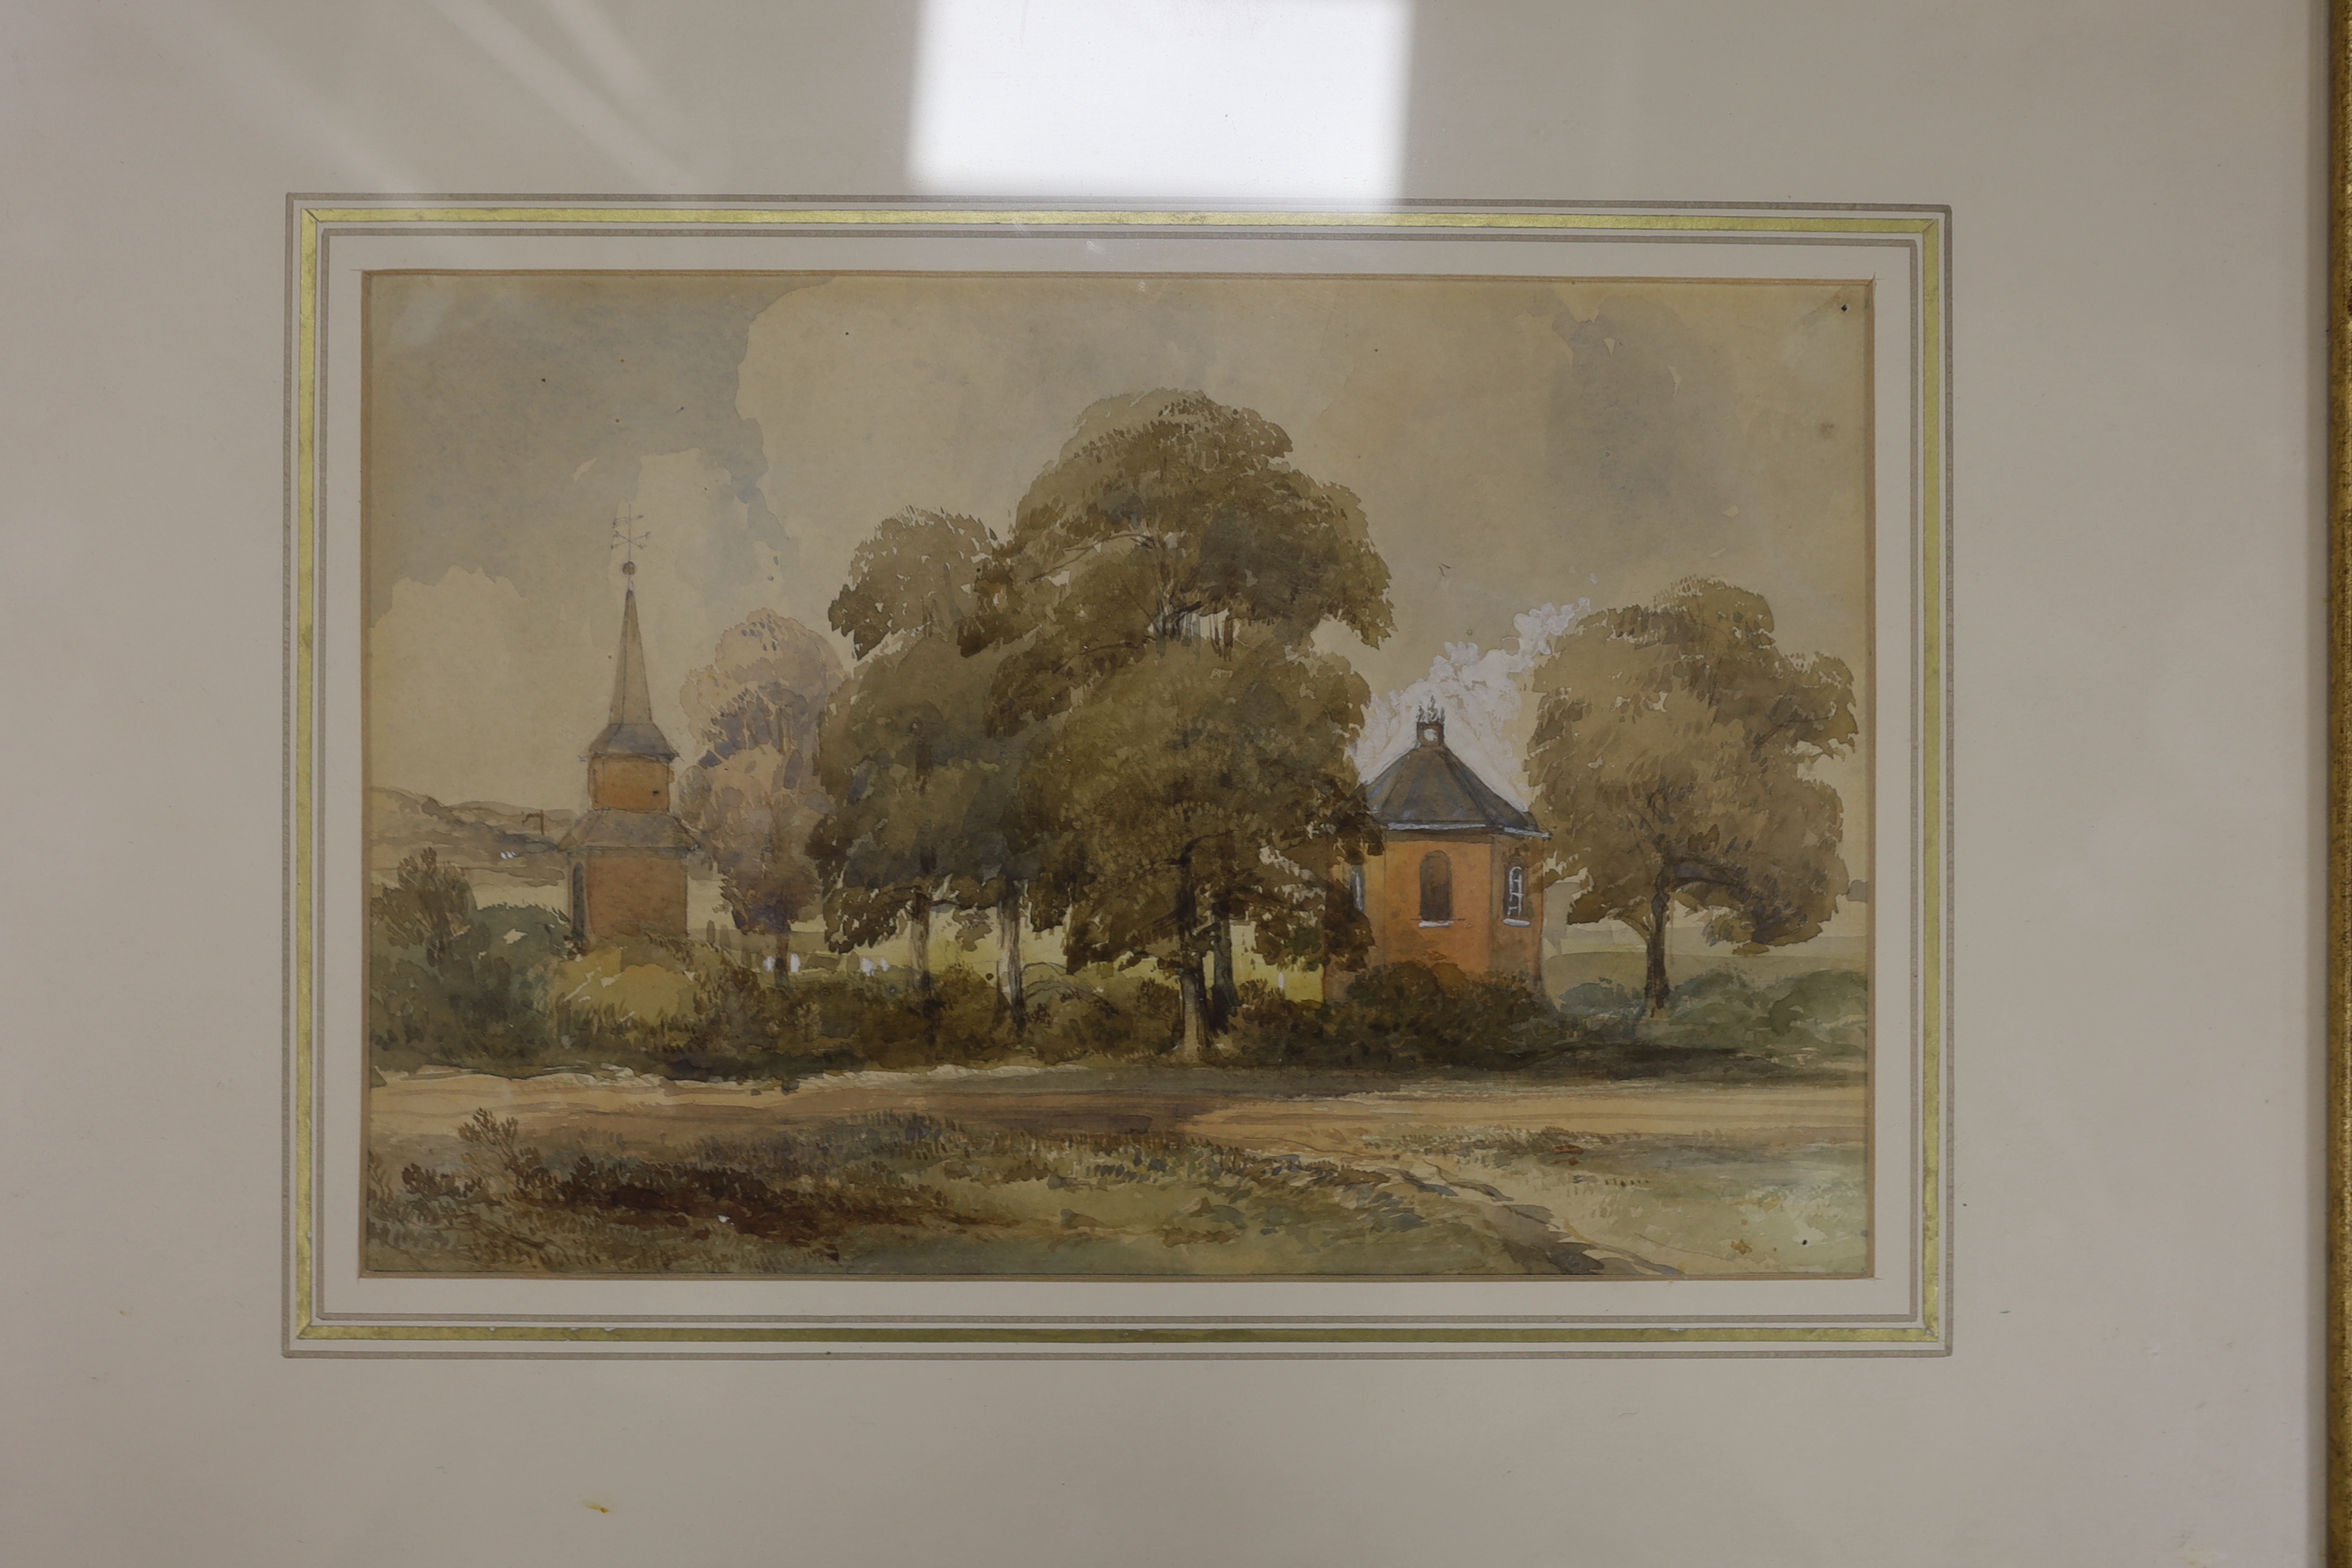 John Harper (1809-1842), watercolour, Landscape near Florence, inscribed by the artist, Abbott & Holder label verso, 14 x 29cm, together with a group of assorted paintings and prints